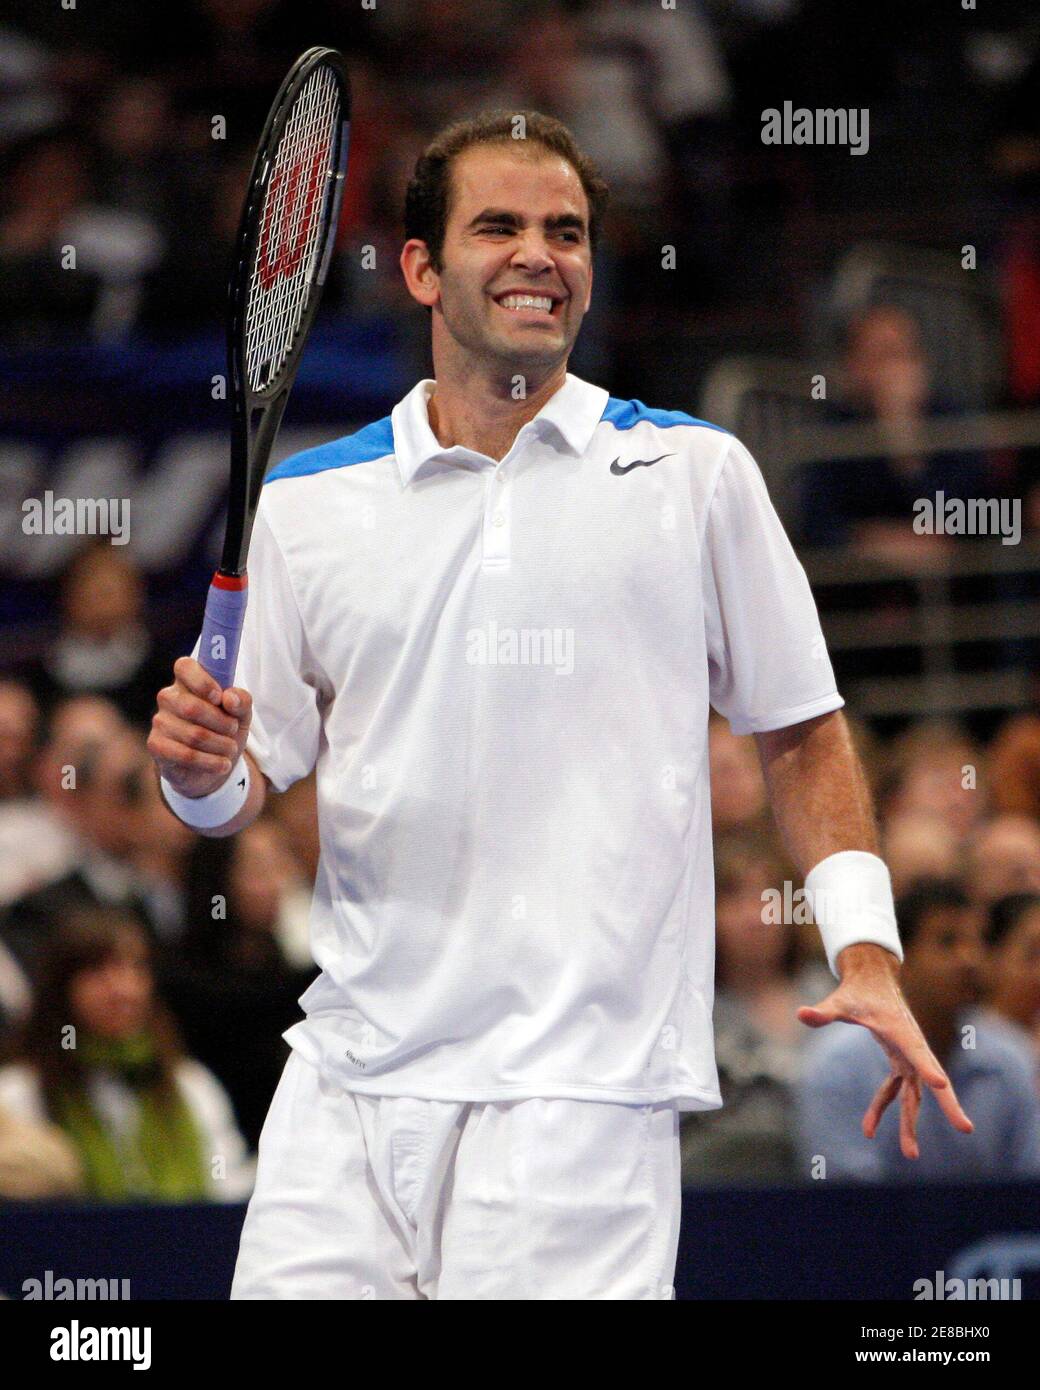 Pete Sampras of the U.S. reacts to a lost point during his exhibition match  against Roger Federer of Switzerland at New York's Madison Square Garden,  March 10, 2008. Federer won the match